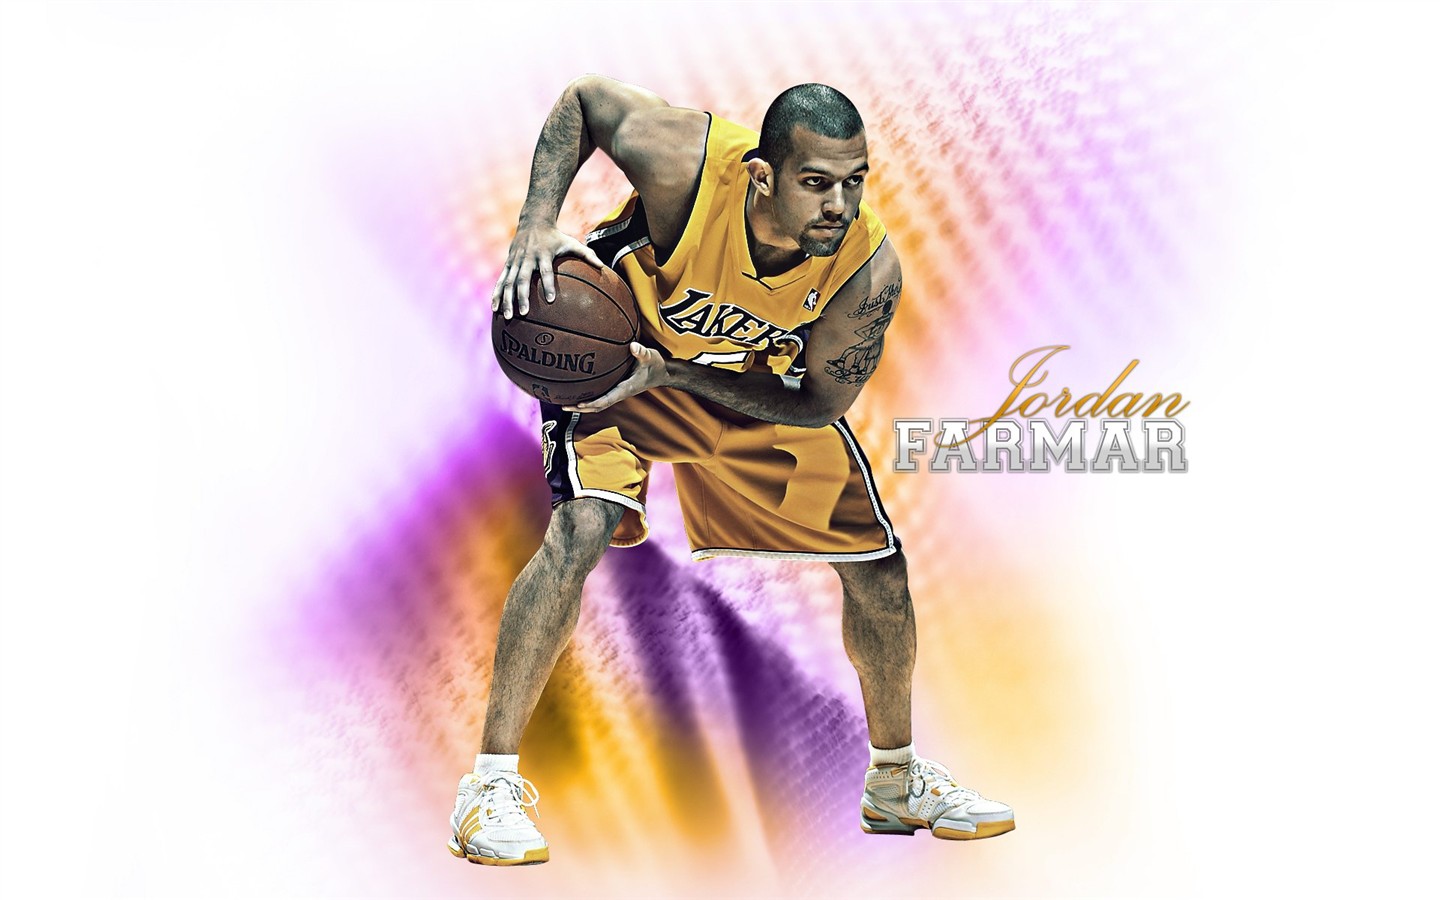 Los Angeles Lakers Wallpaper Oficial #11 - 1440x900